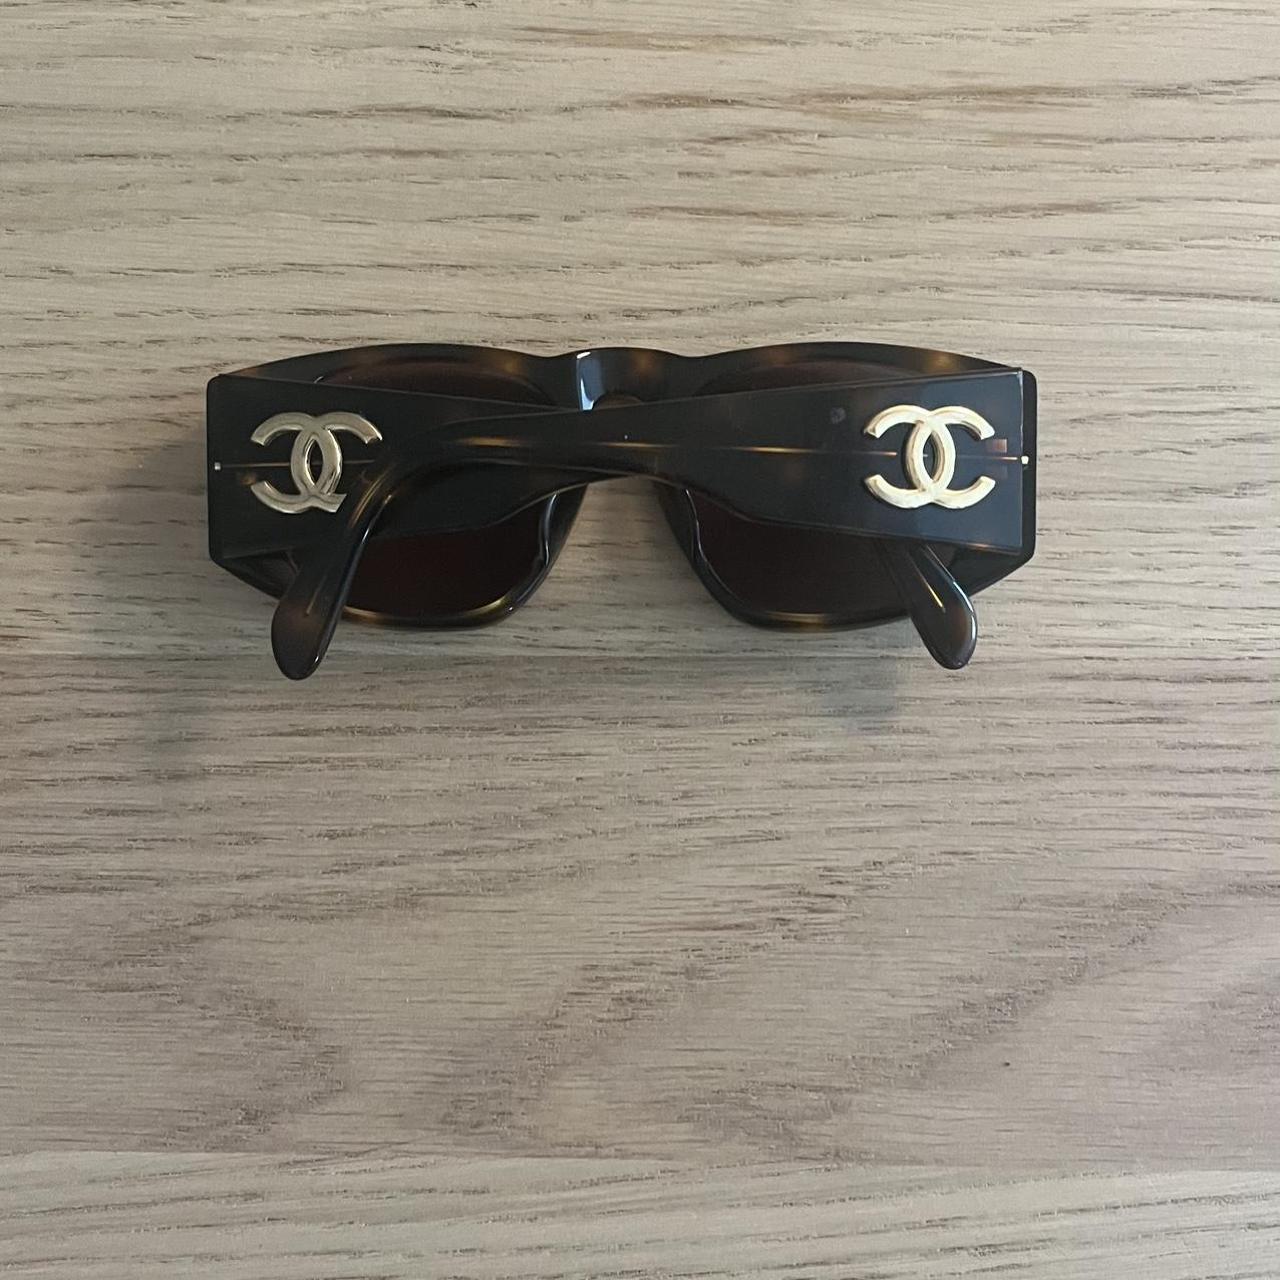 Vintage Chanel sunglasses 90s aesthetic Too small - Depop